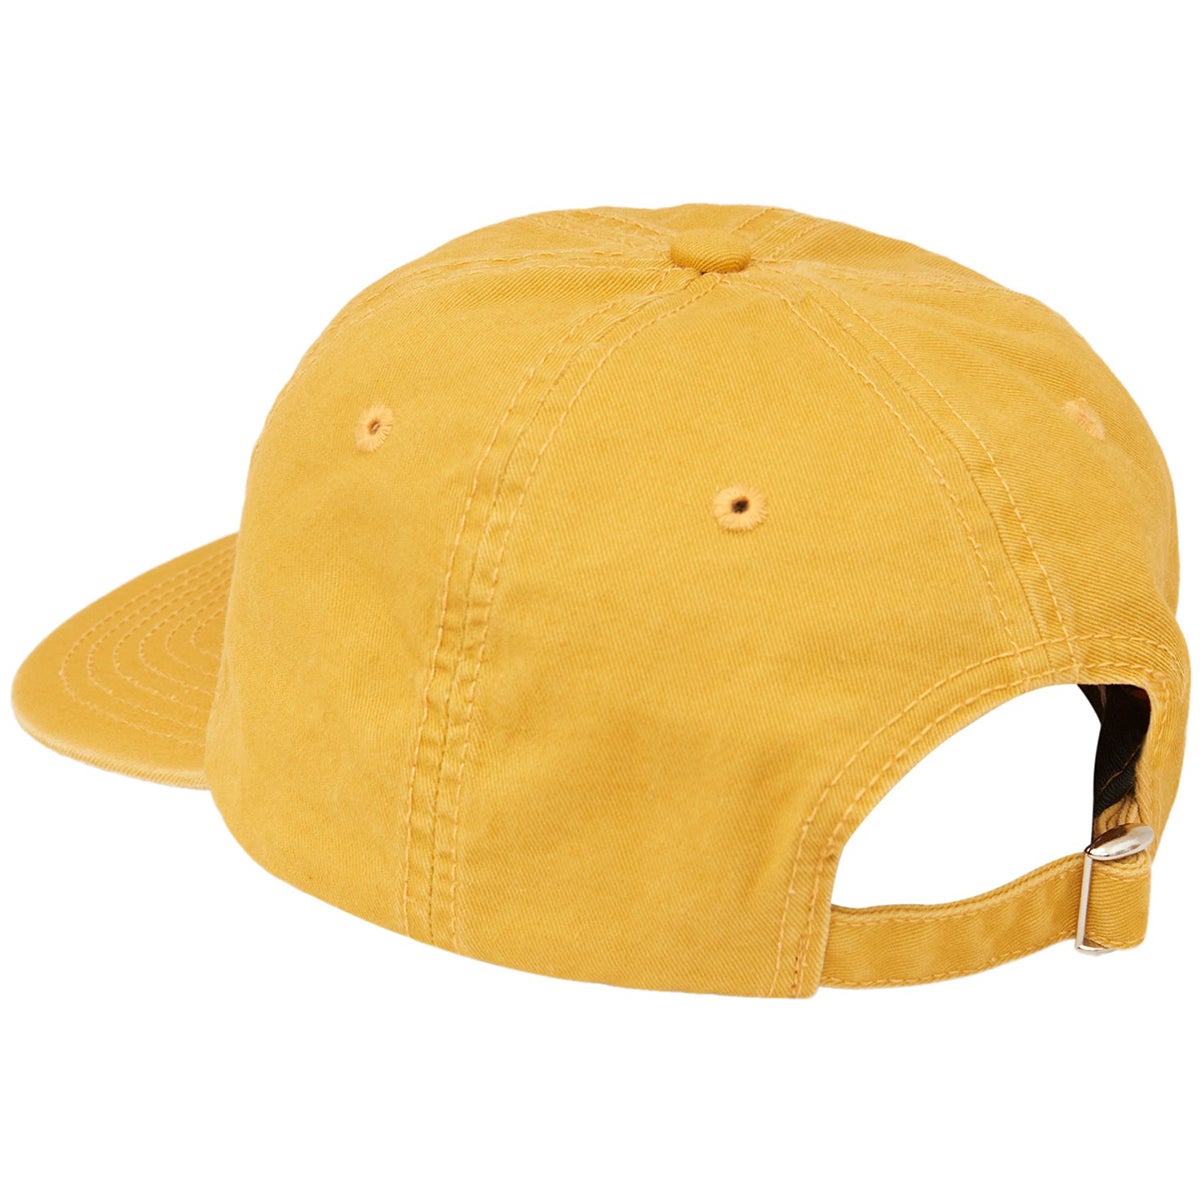 Only NY Lodge Polo Hat in Maize/Maize | Boardertown